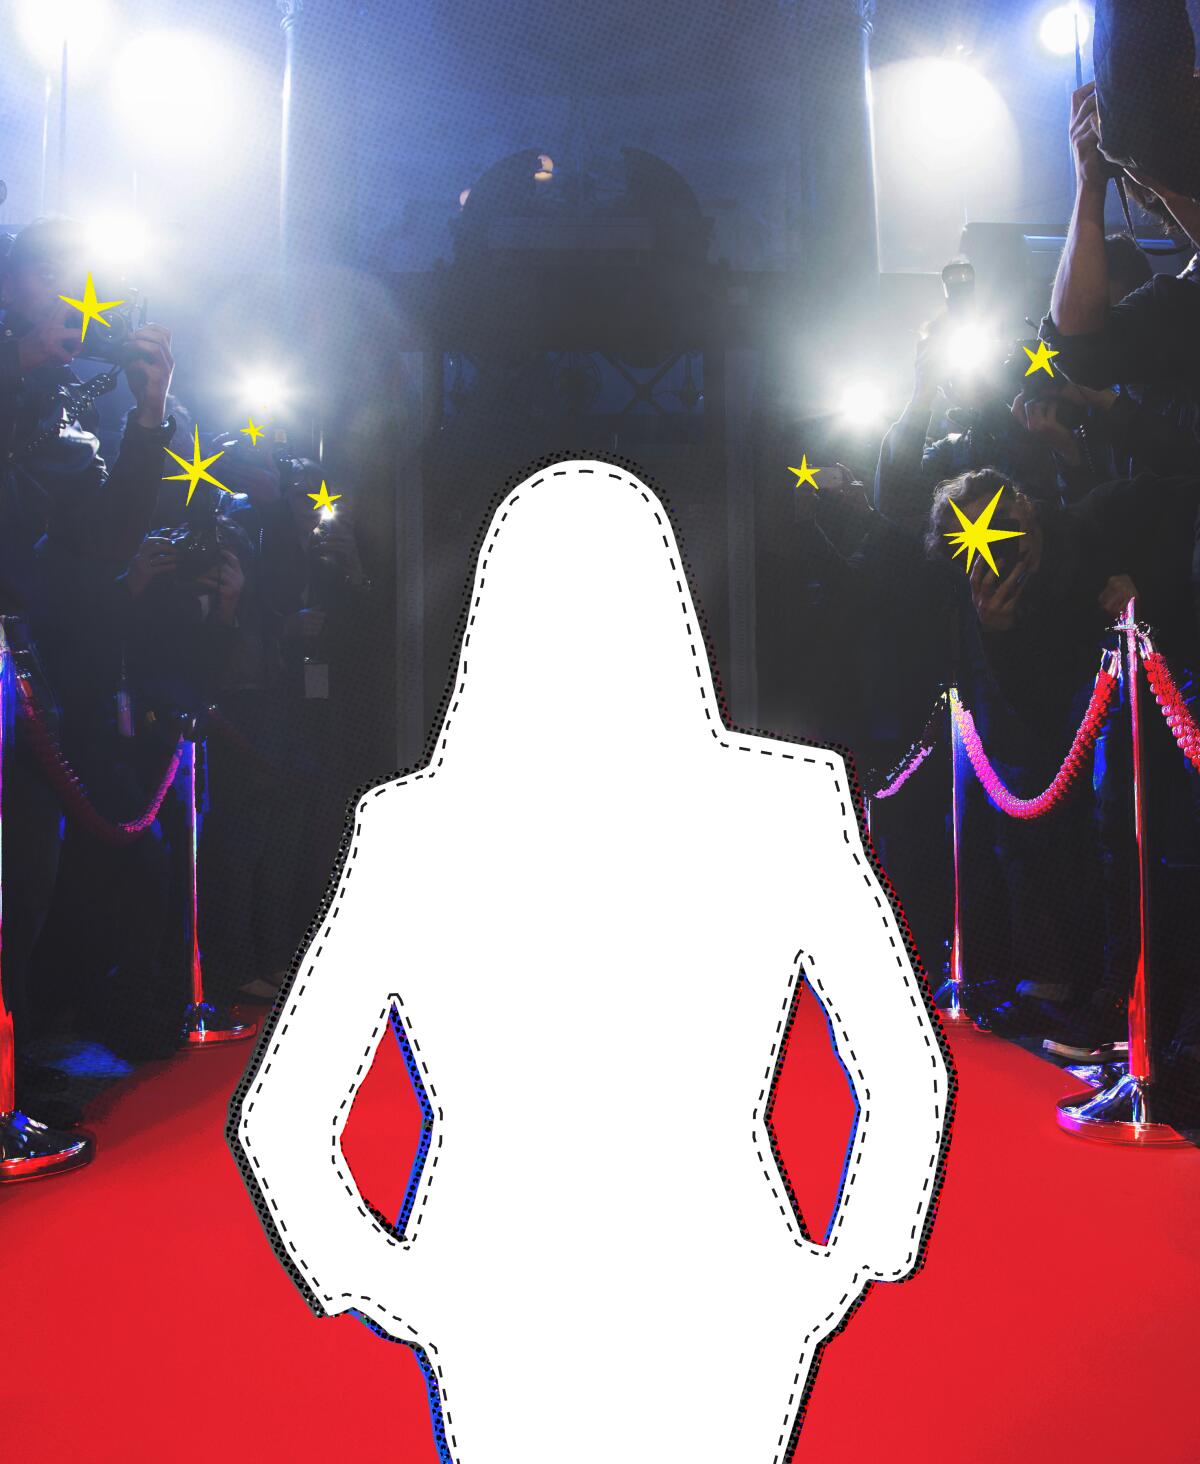 An illustration of an empty outline of a person walking on a red carpet